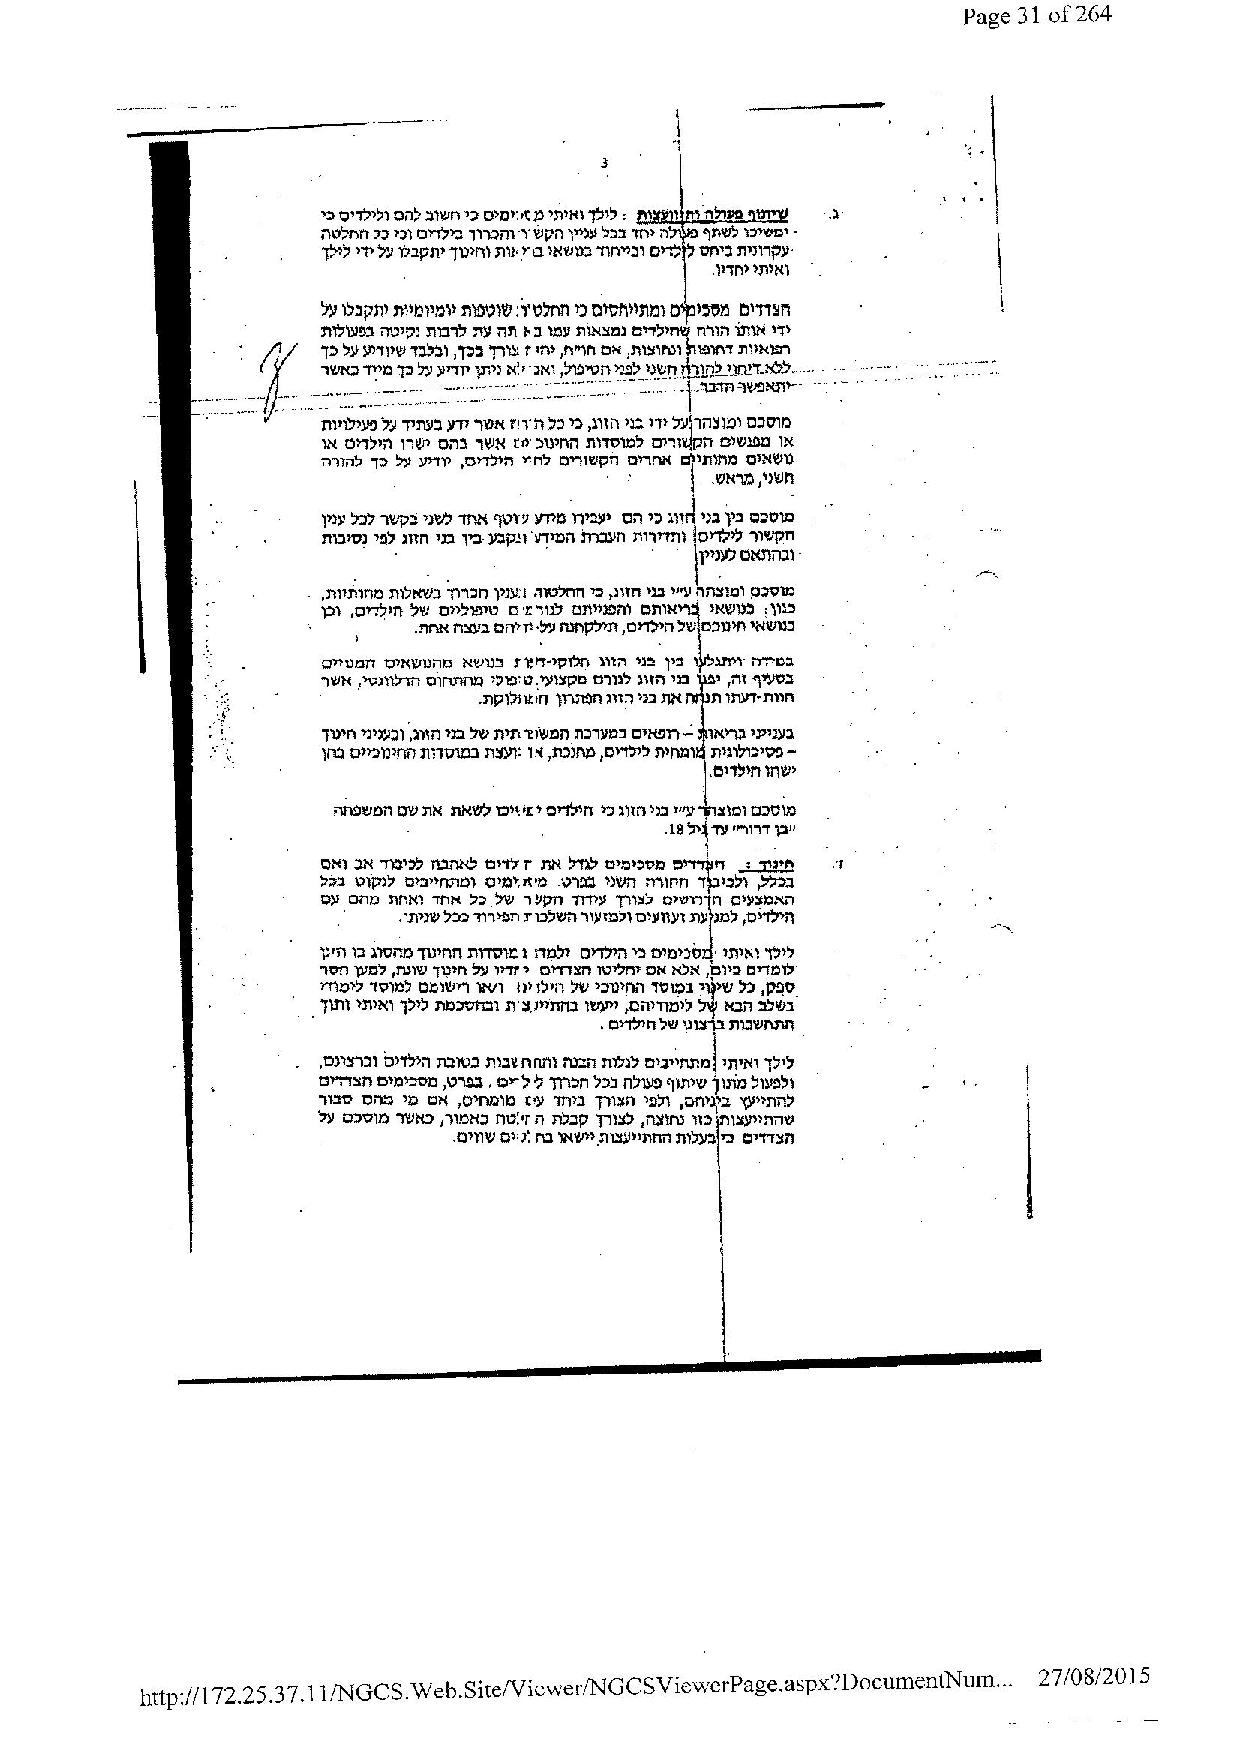 document-page-031